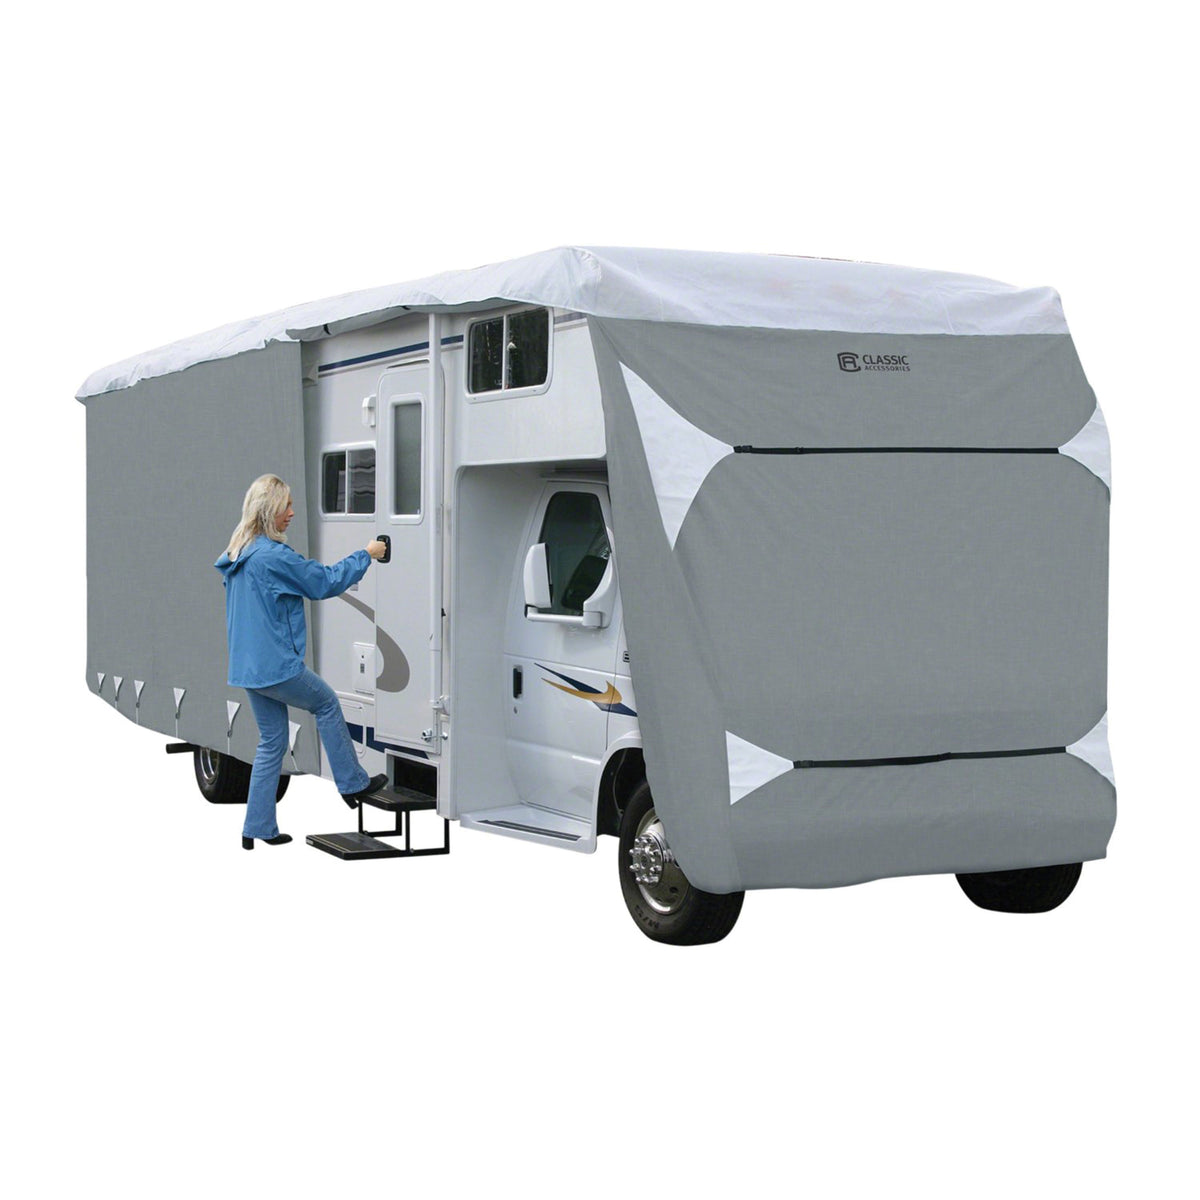 Classic Accessories 79563 Over Drive PolyPRO3 Deluxe Class C RV Cover - 29' to 32', Model 5